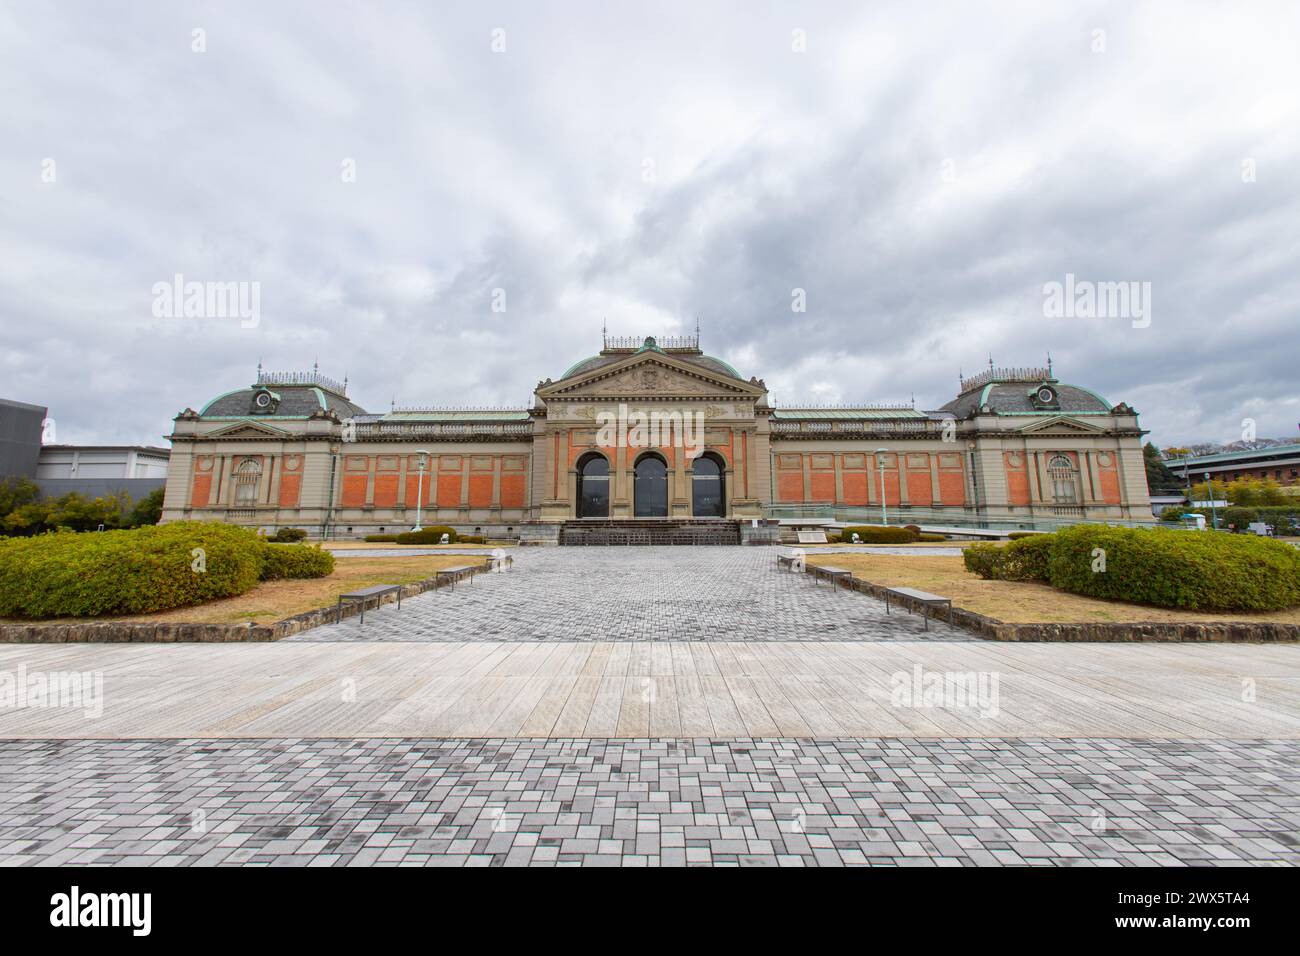 Kyoto, JAPAN - Dec 5 2021 : Meiji Kotokan Hall (Main Hall of the Former Imperial Museum of Kyoto) in cloudy day. Stock Photo